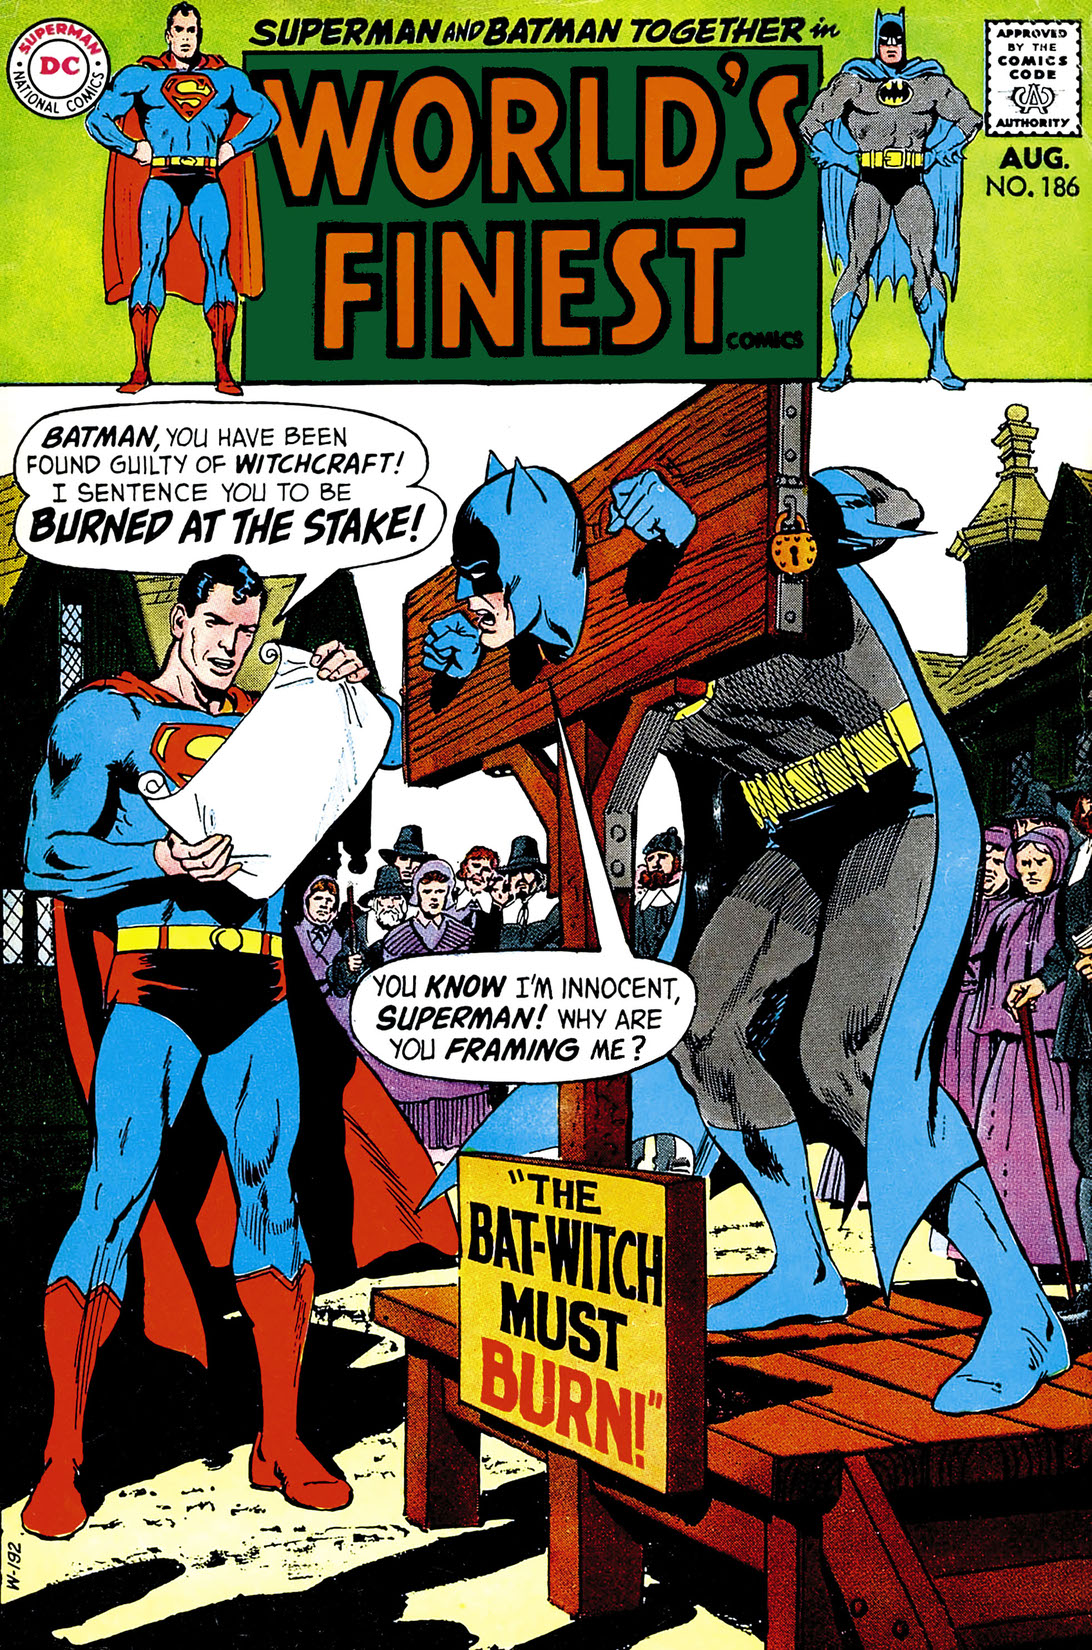 World's Finest Comics (1941-) #186 preview images